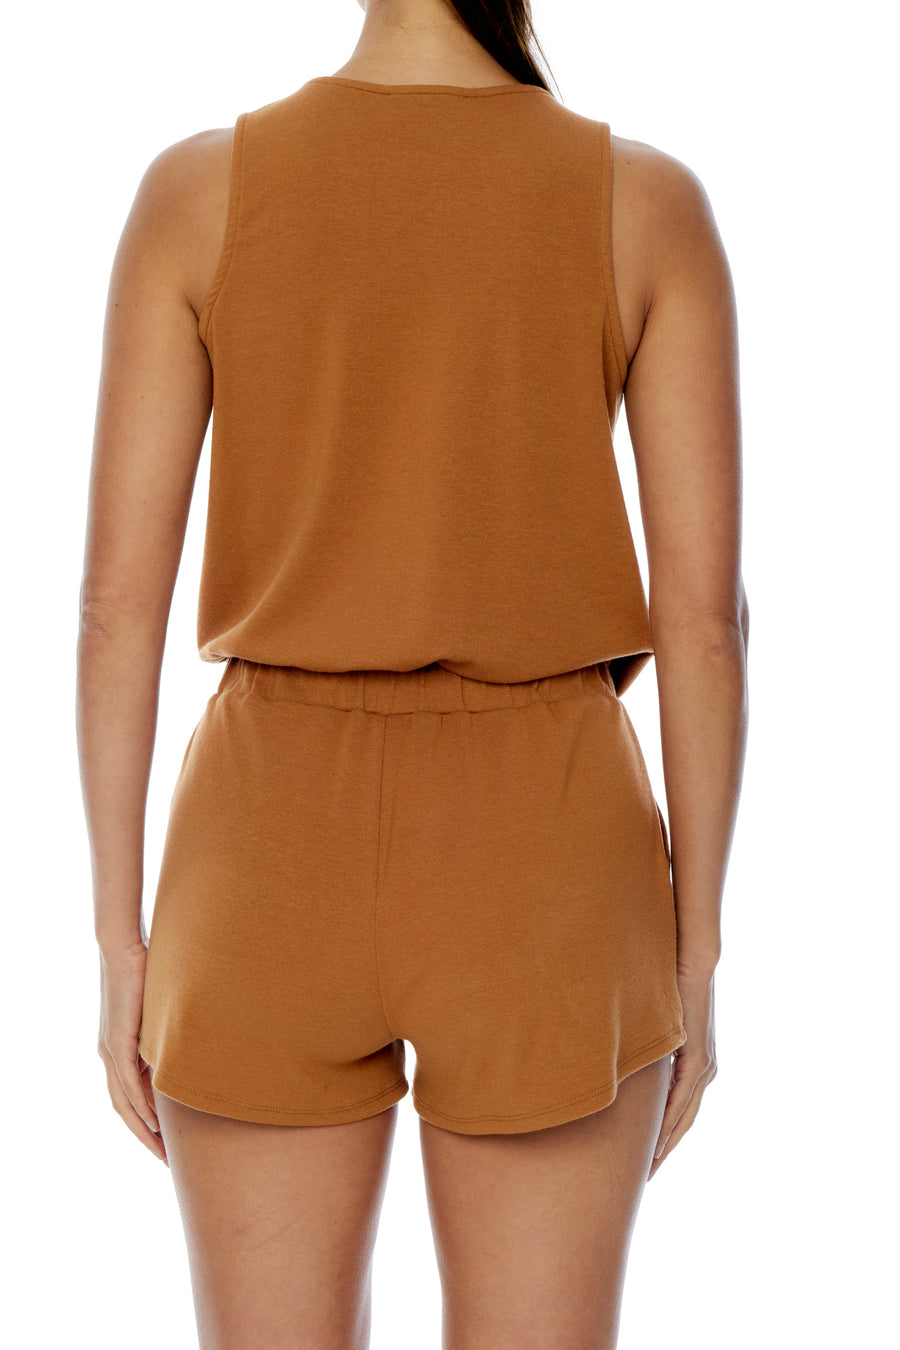 romper with an elasticized drawstring waist romper and criss cross front in meerkat